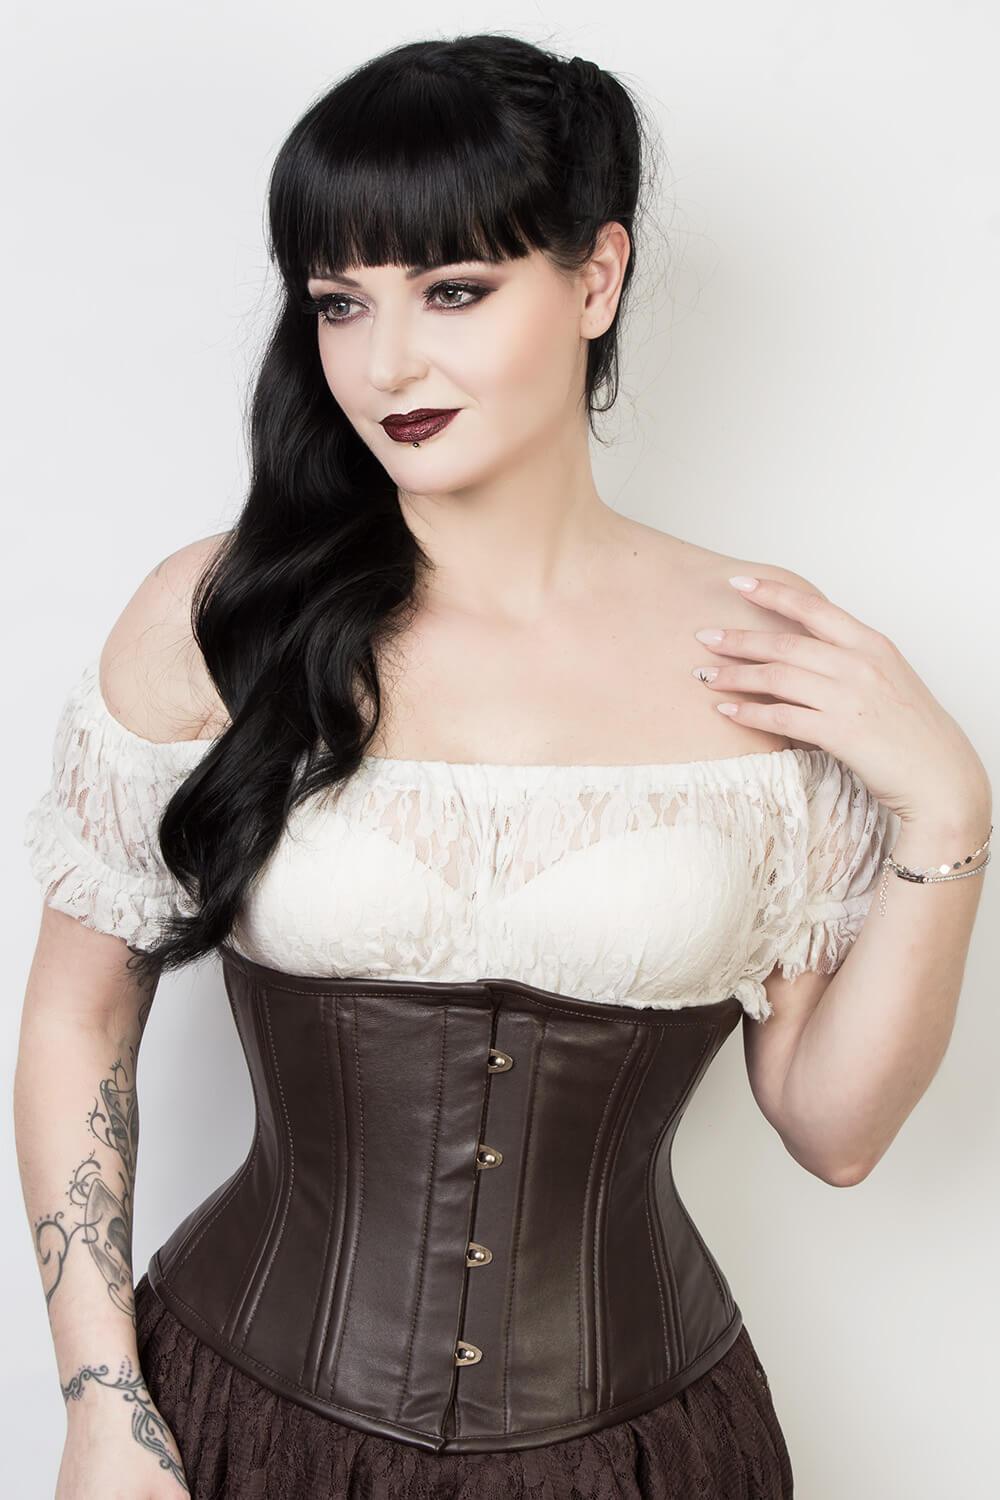 Did you see the Custom Made Corset and Waist Training that we have